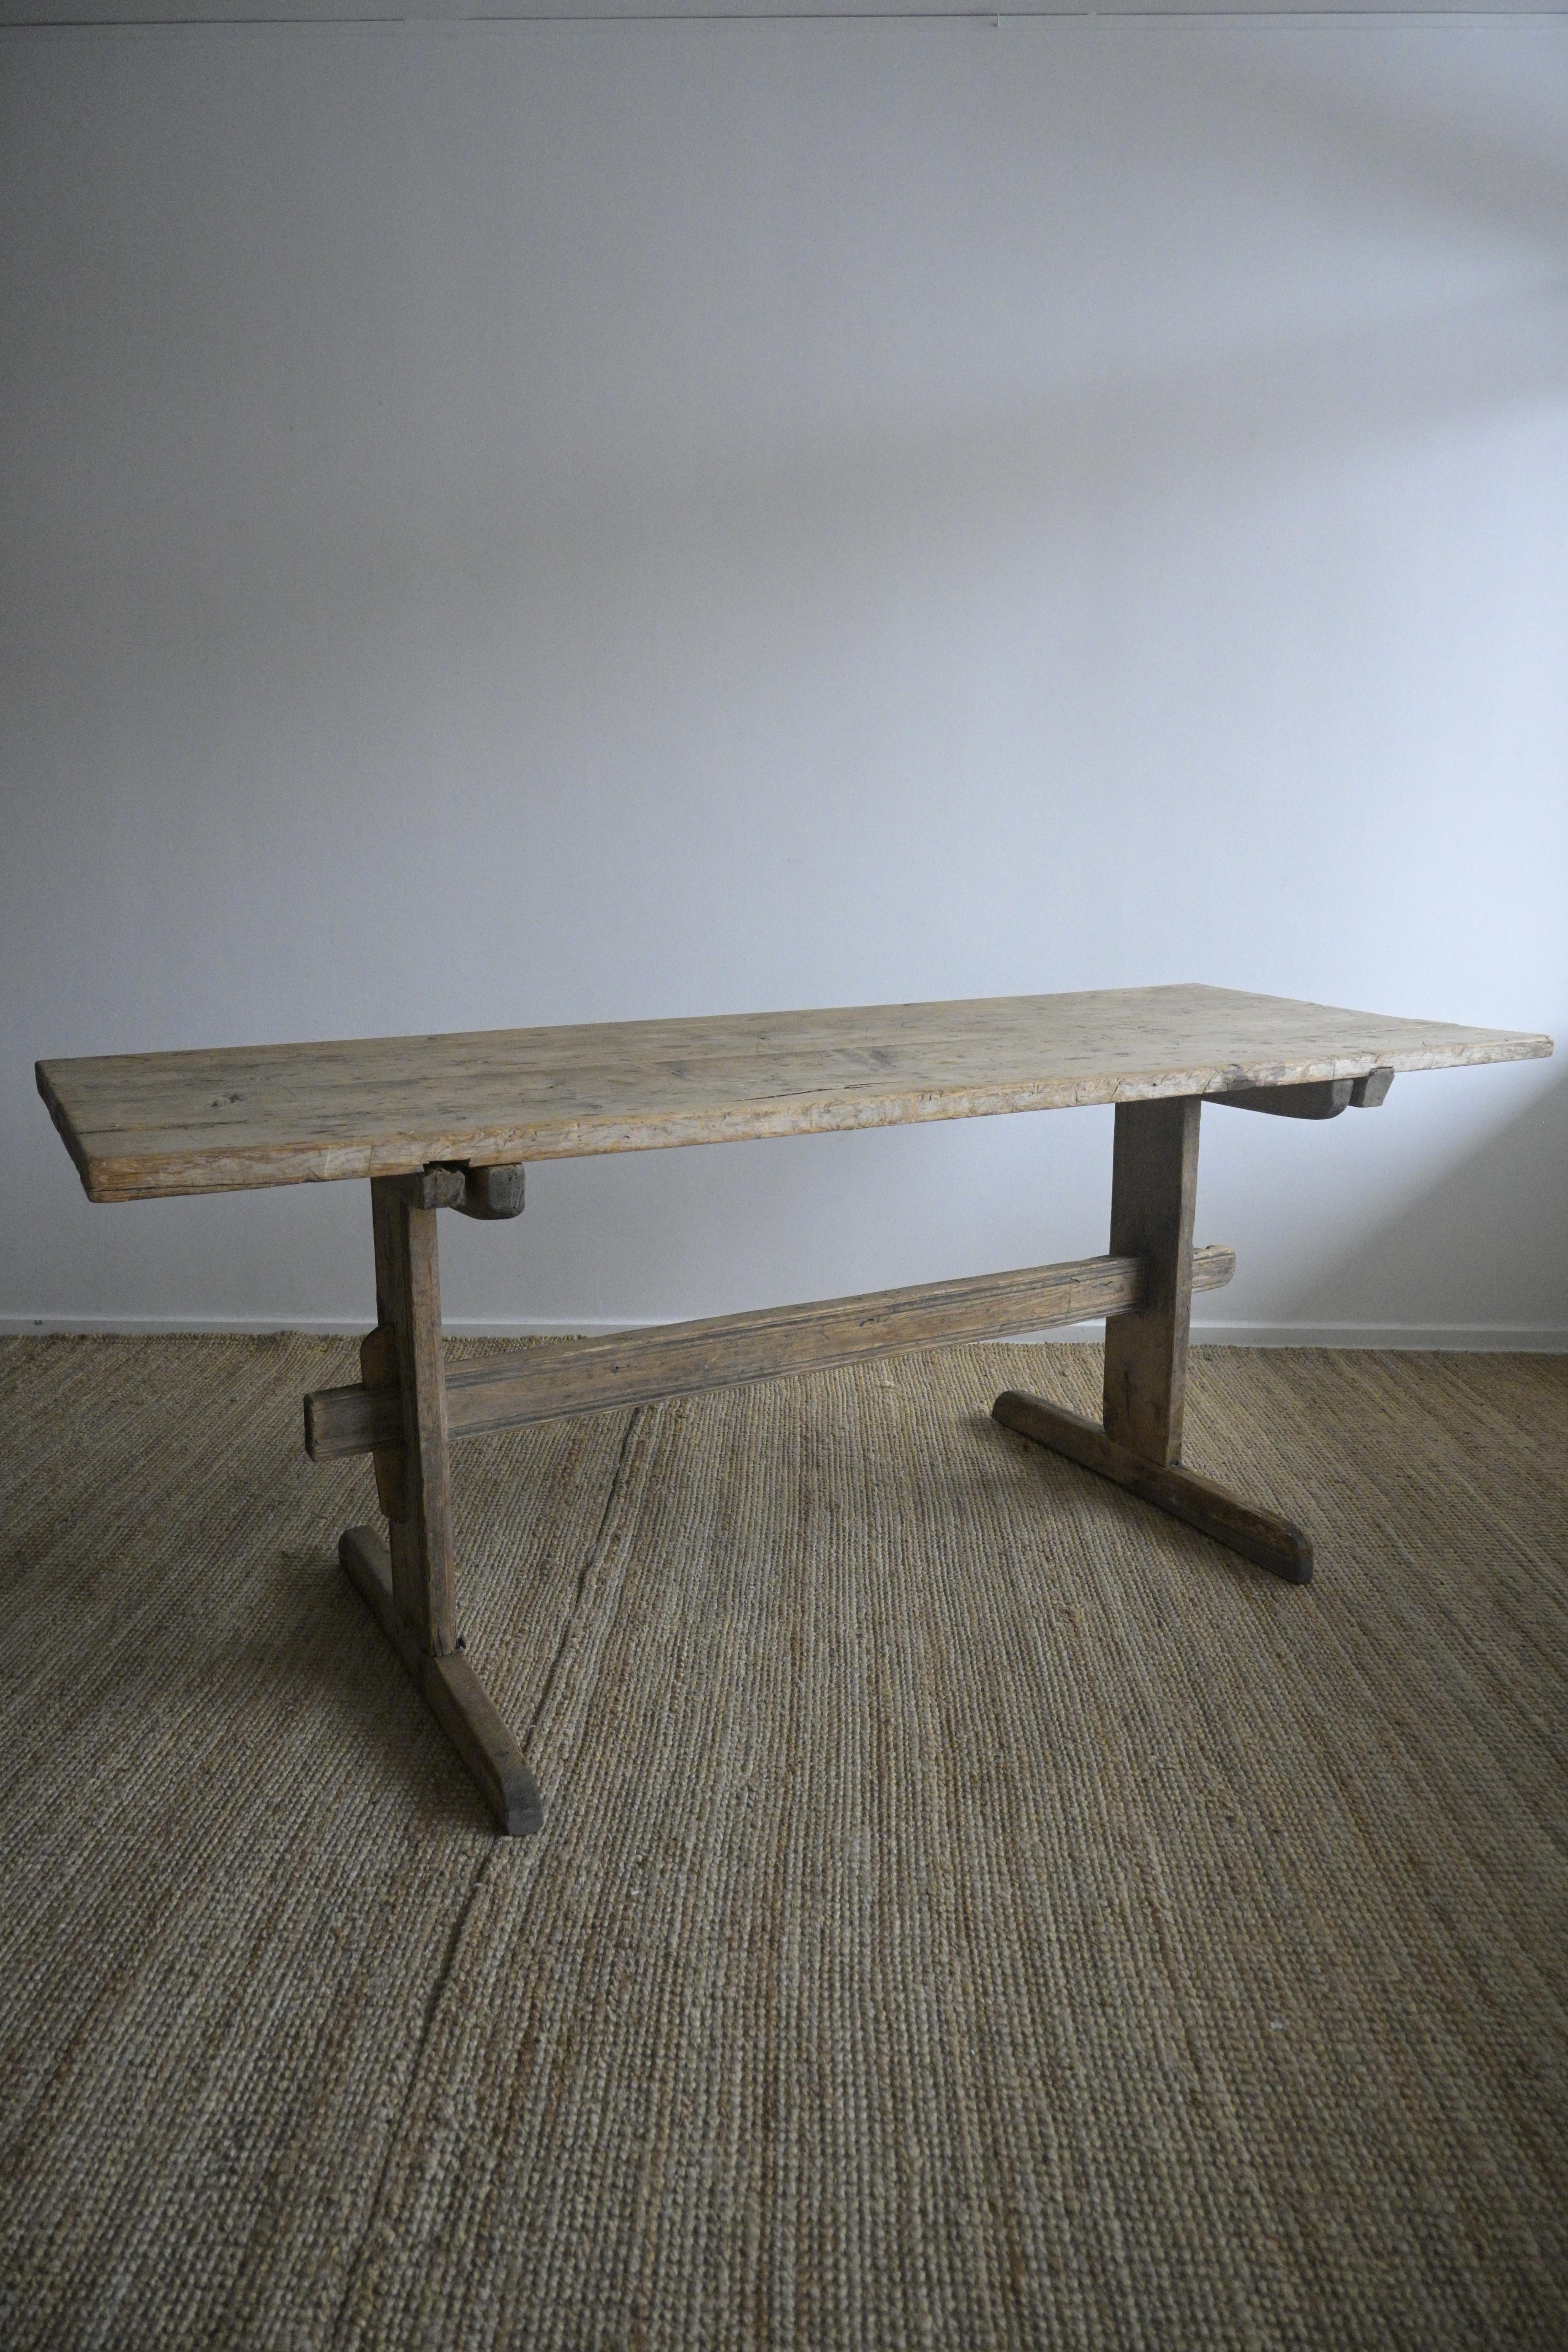 Late 18th-century long Trestle Table from Sweden.

Time has passed and has come again. The patina and wear over the centuries have made it into what it is today.

The tabletop has nicks, marks, and old beautiful natural cracks, and also has